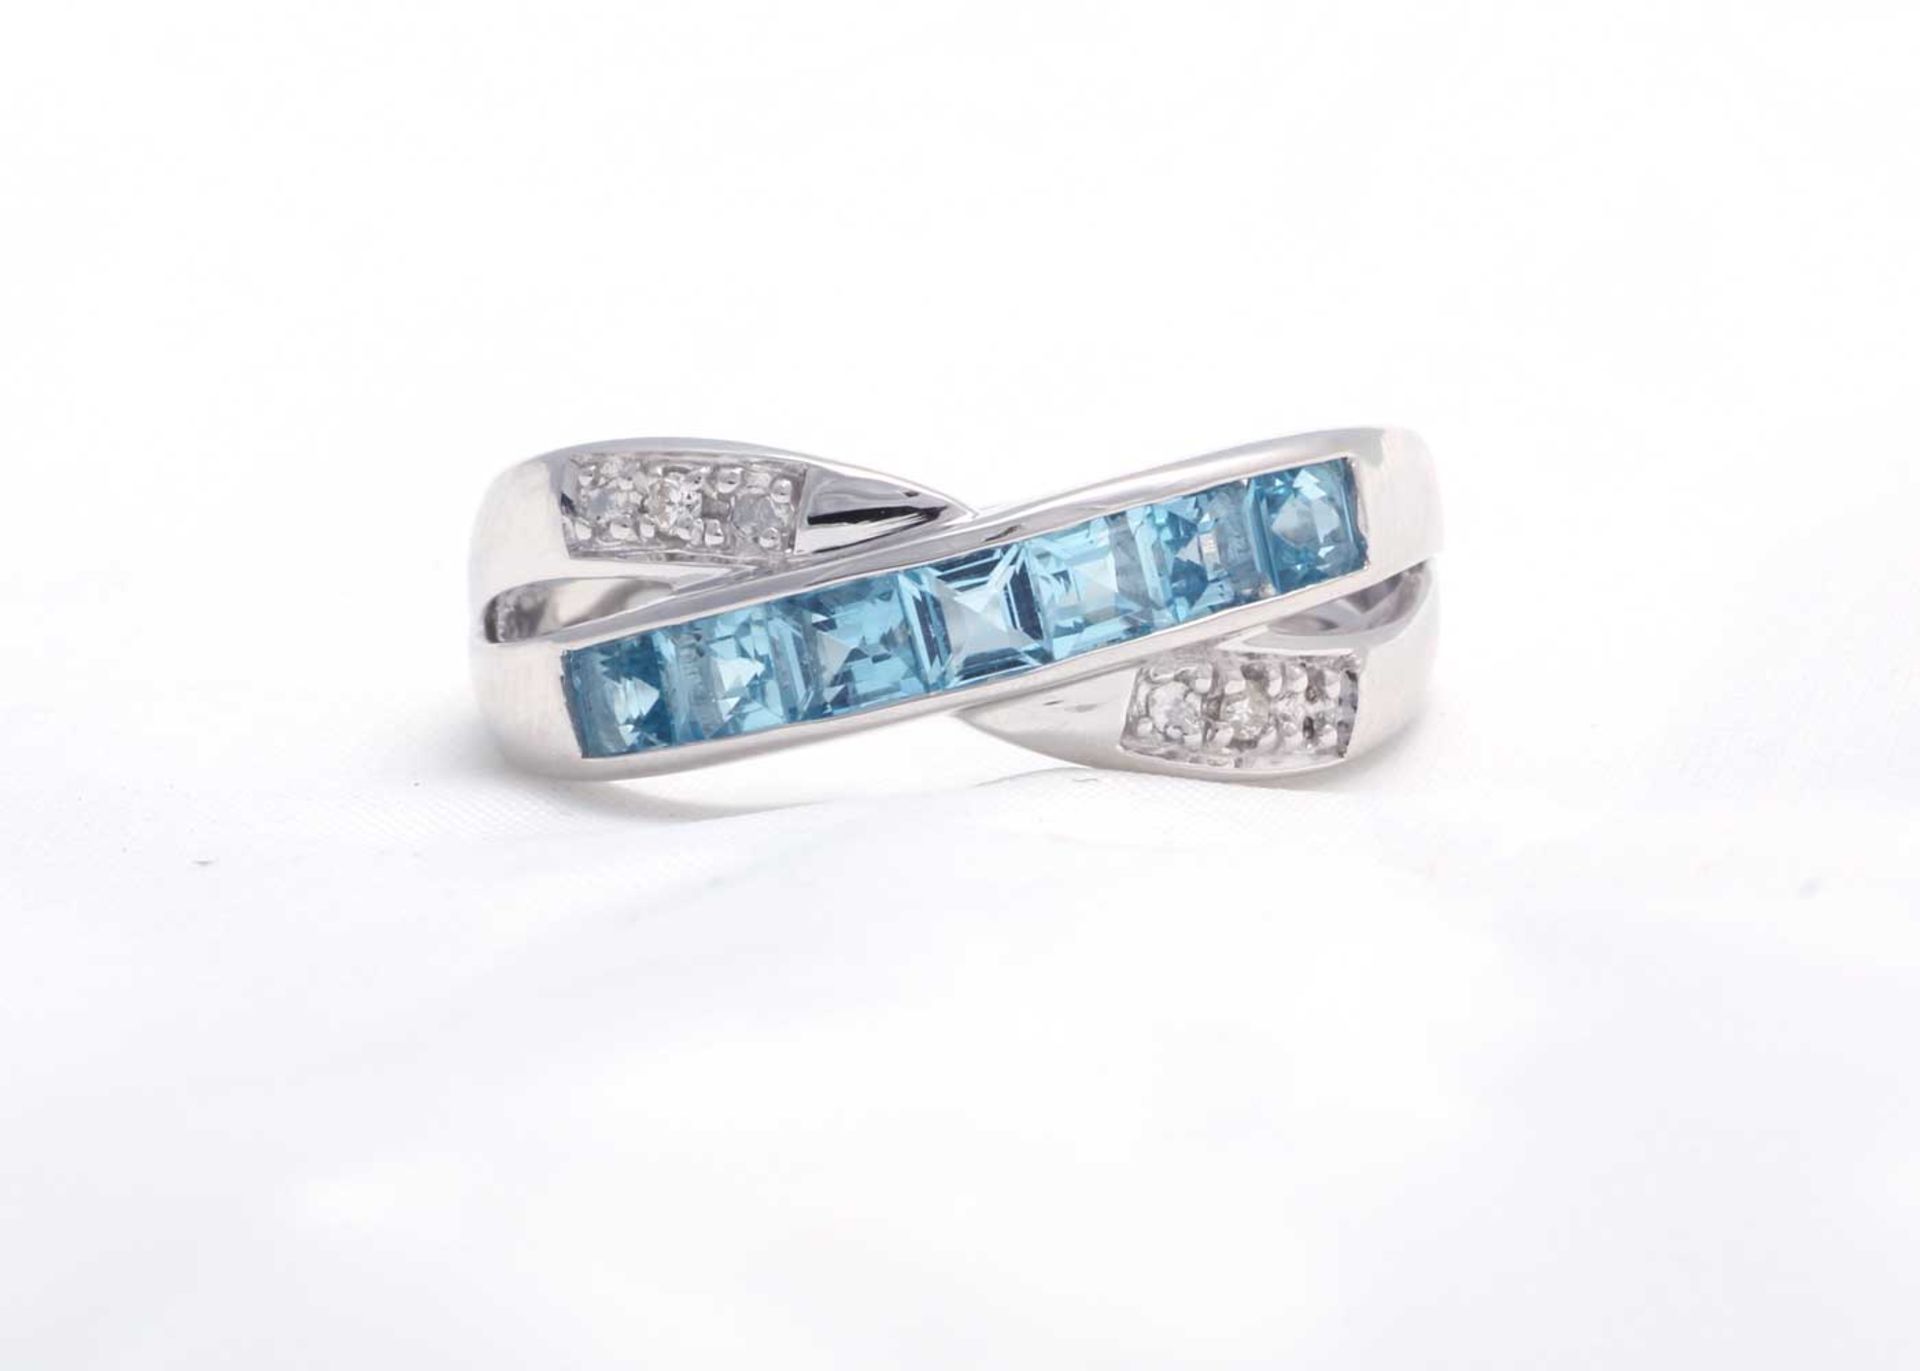 9ct White Gold Blue Topaz And Diamond Ring 0.06 Carats - Valued by GIE £1,625.00 - This twist on a - Image 5 of 9